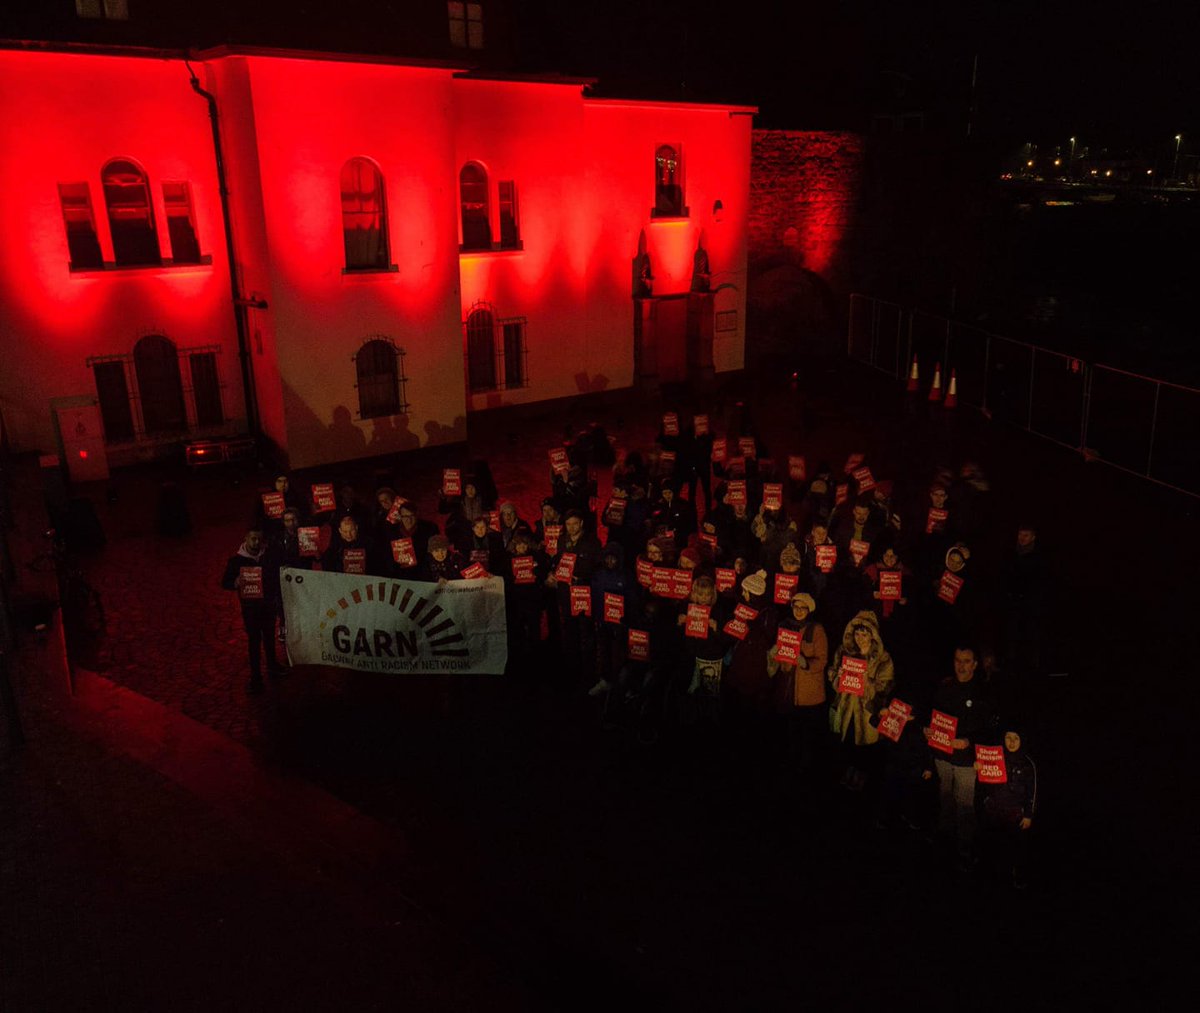 On a positive note, great turn out in Galway tonight for "Show Racism the Red Card"  Photo by Marc Jennings